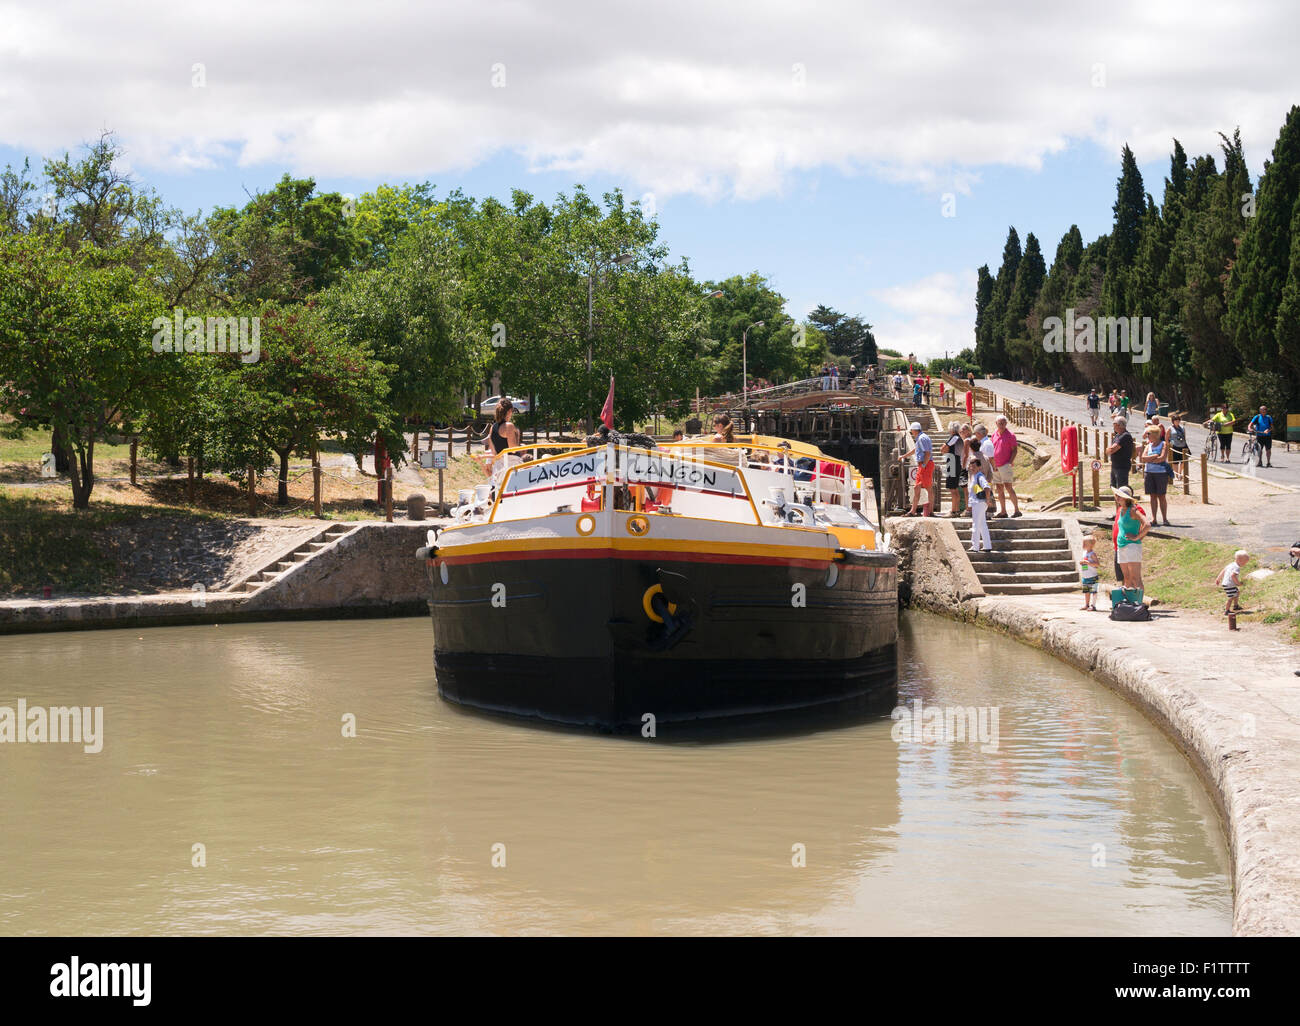 The large houseboat Langon leaving the Fonserannes locks at Béziers, Languedoc-Roussillon, France, Europe Stock Photo